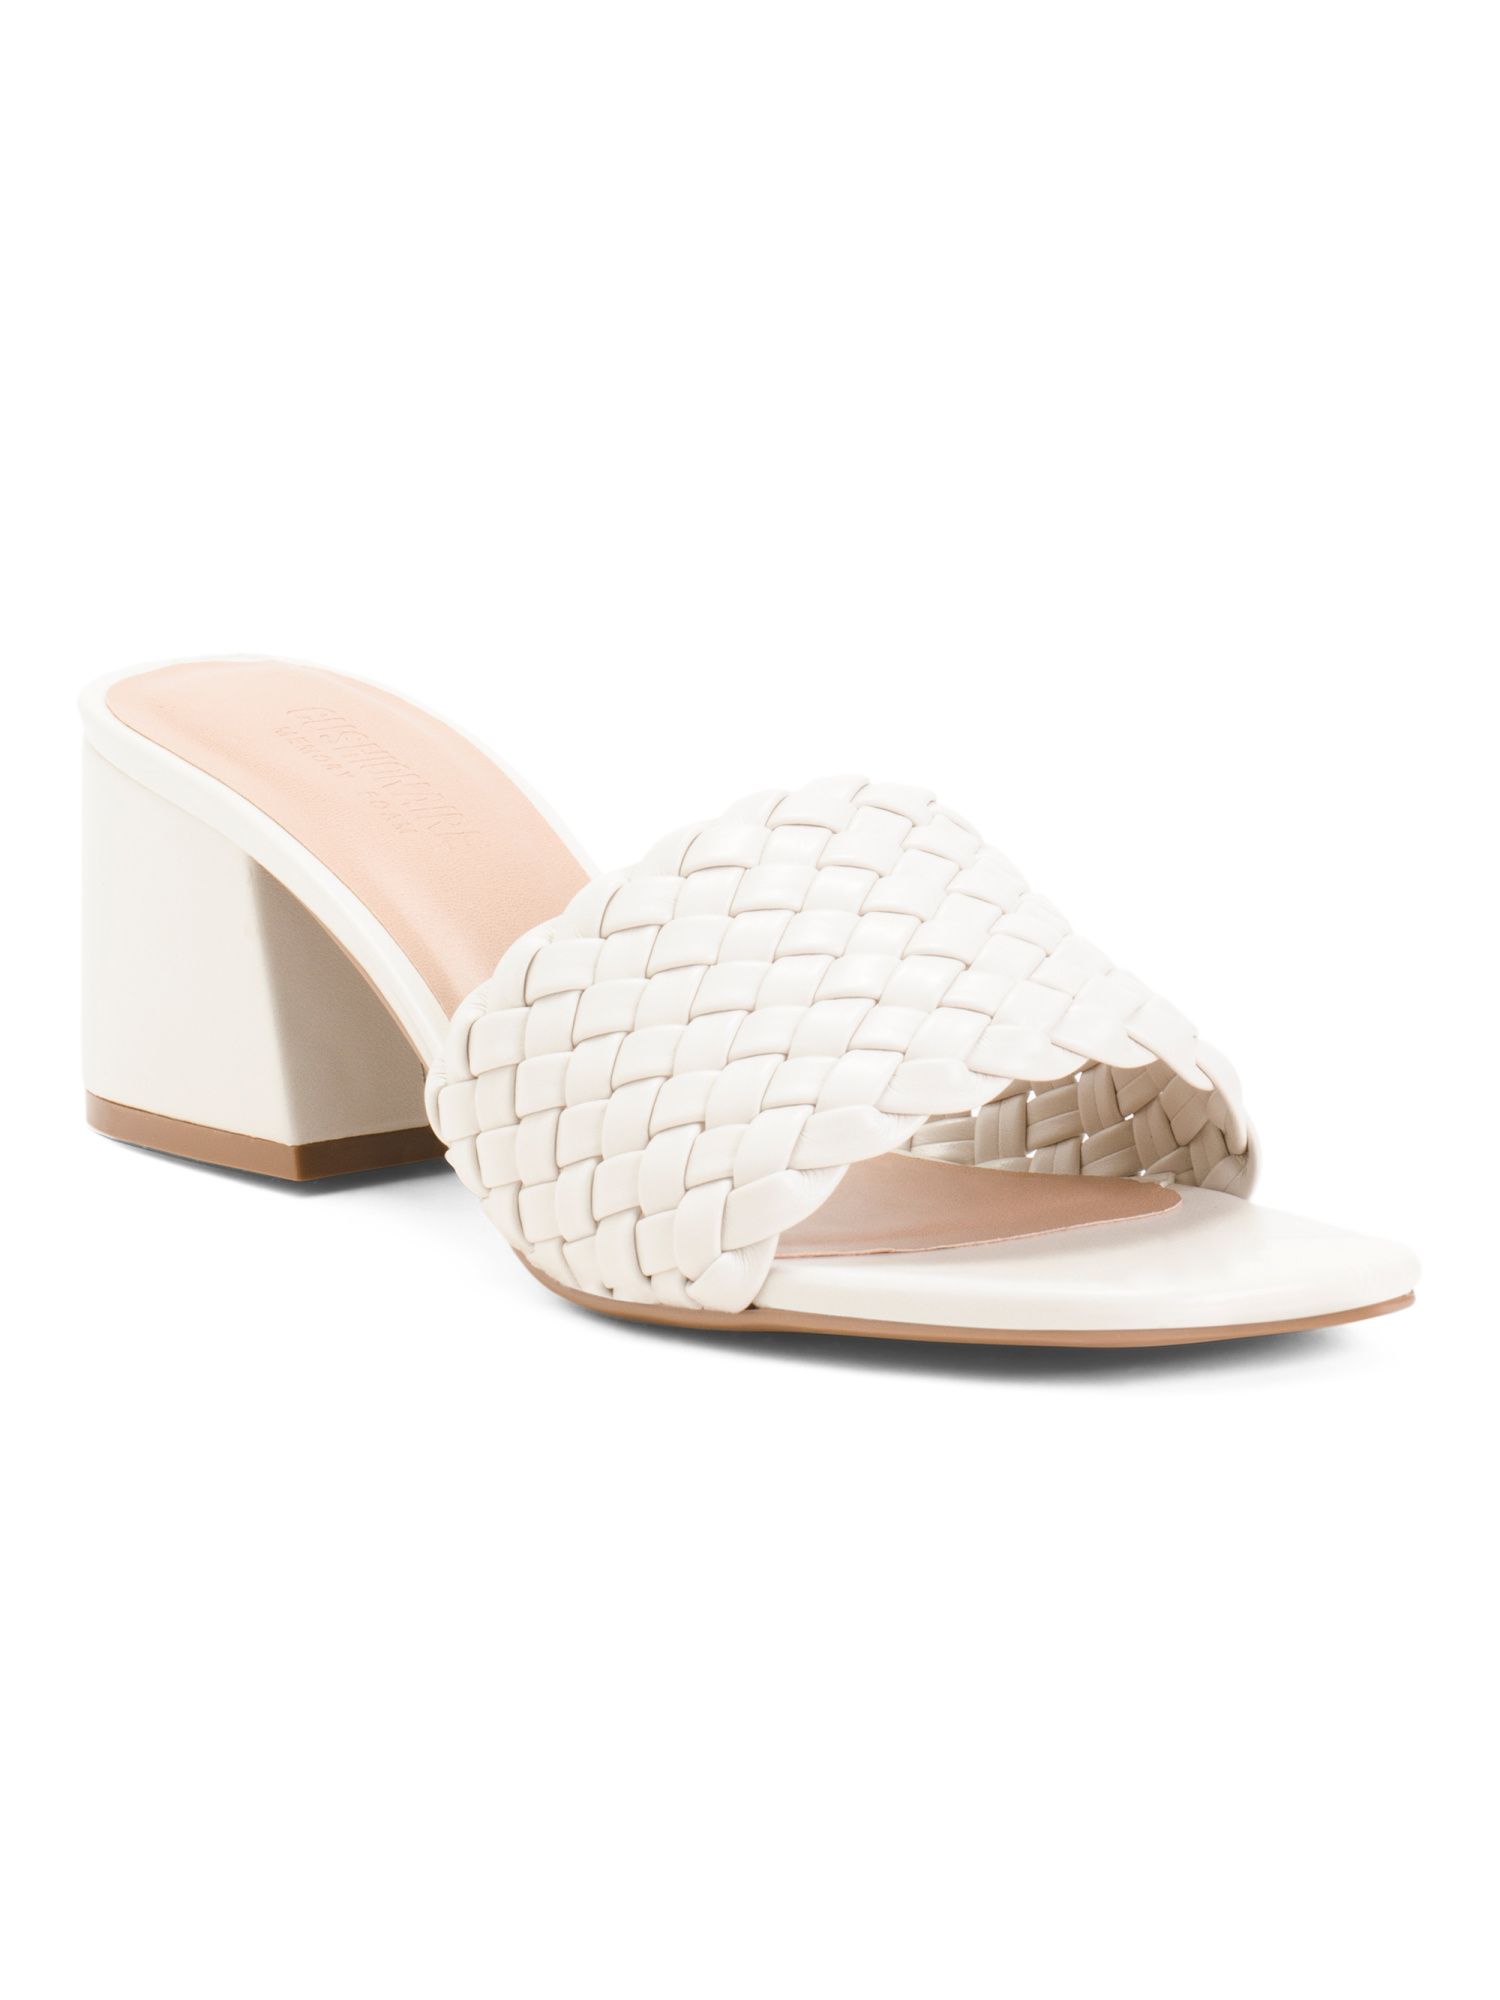 Square Toe Heels With Braided Band | Women's Shoes | Marshalls | Marshalls